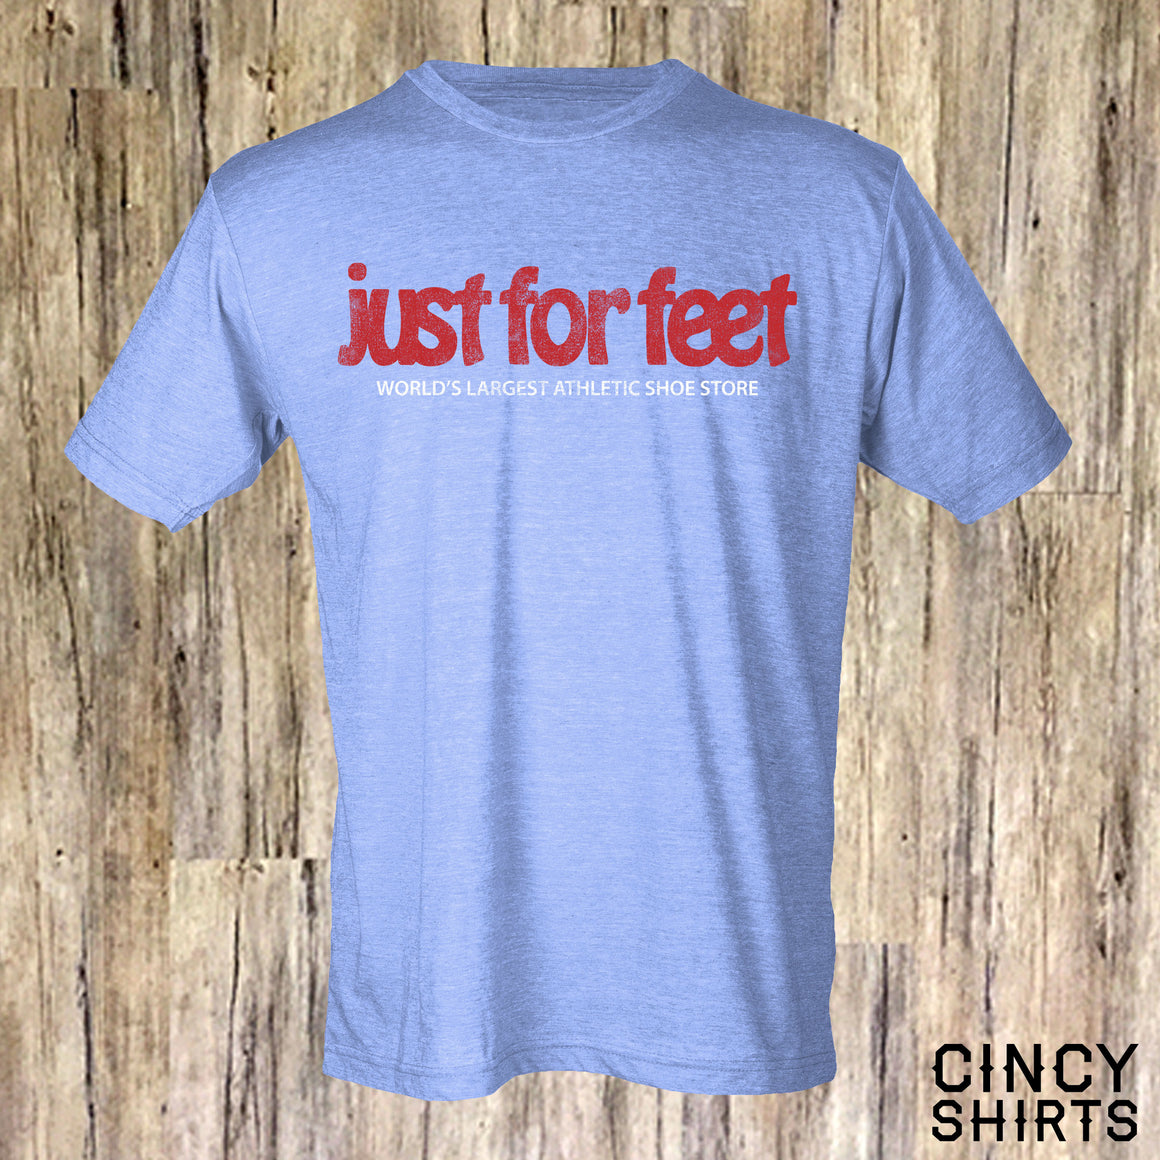 Just For Feet - Cincy Shirts